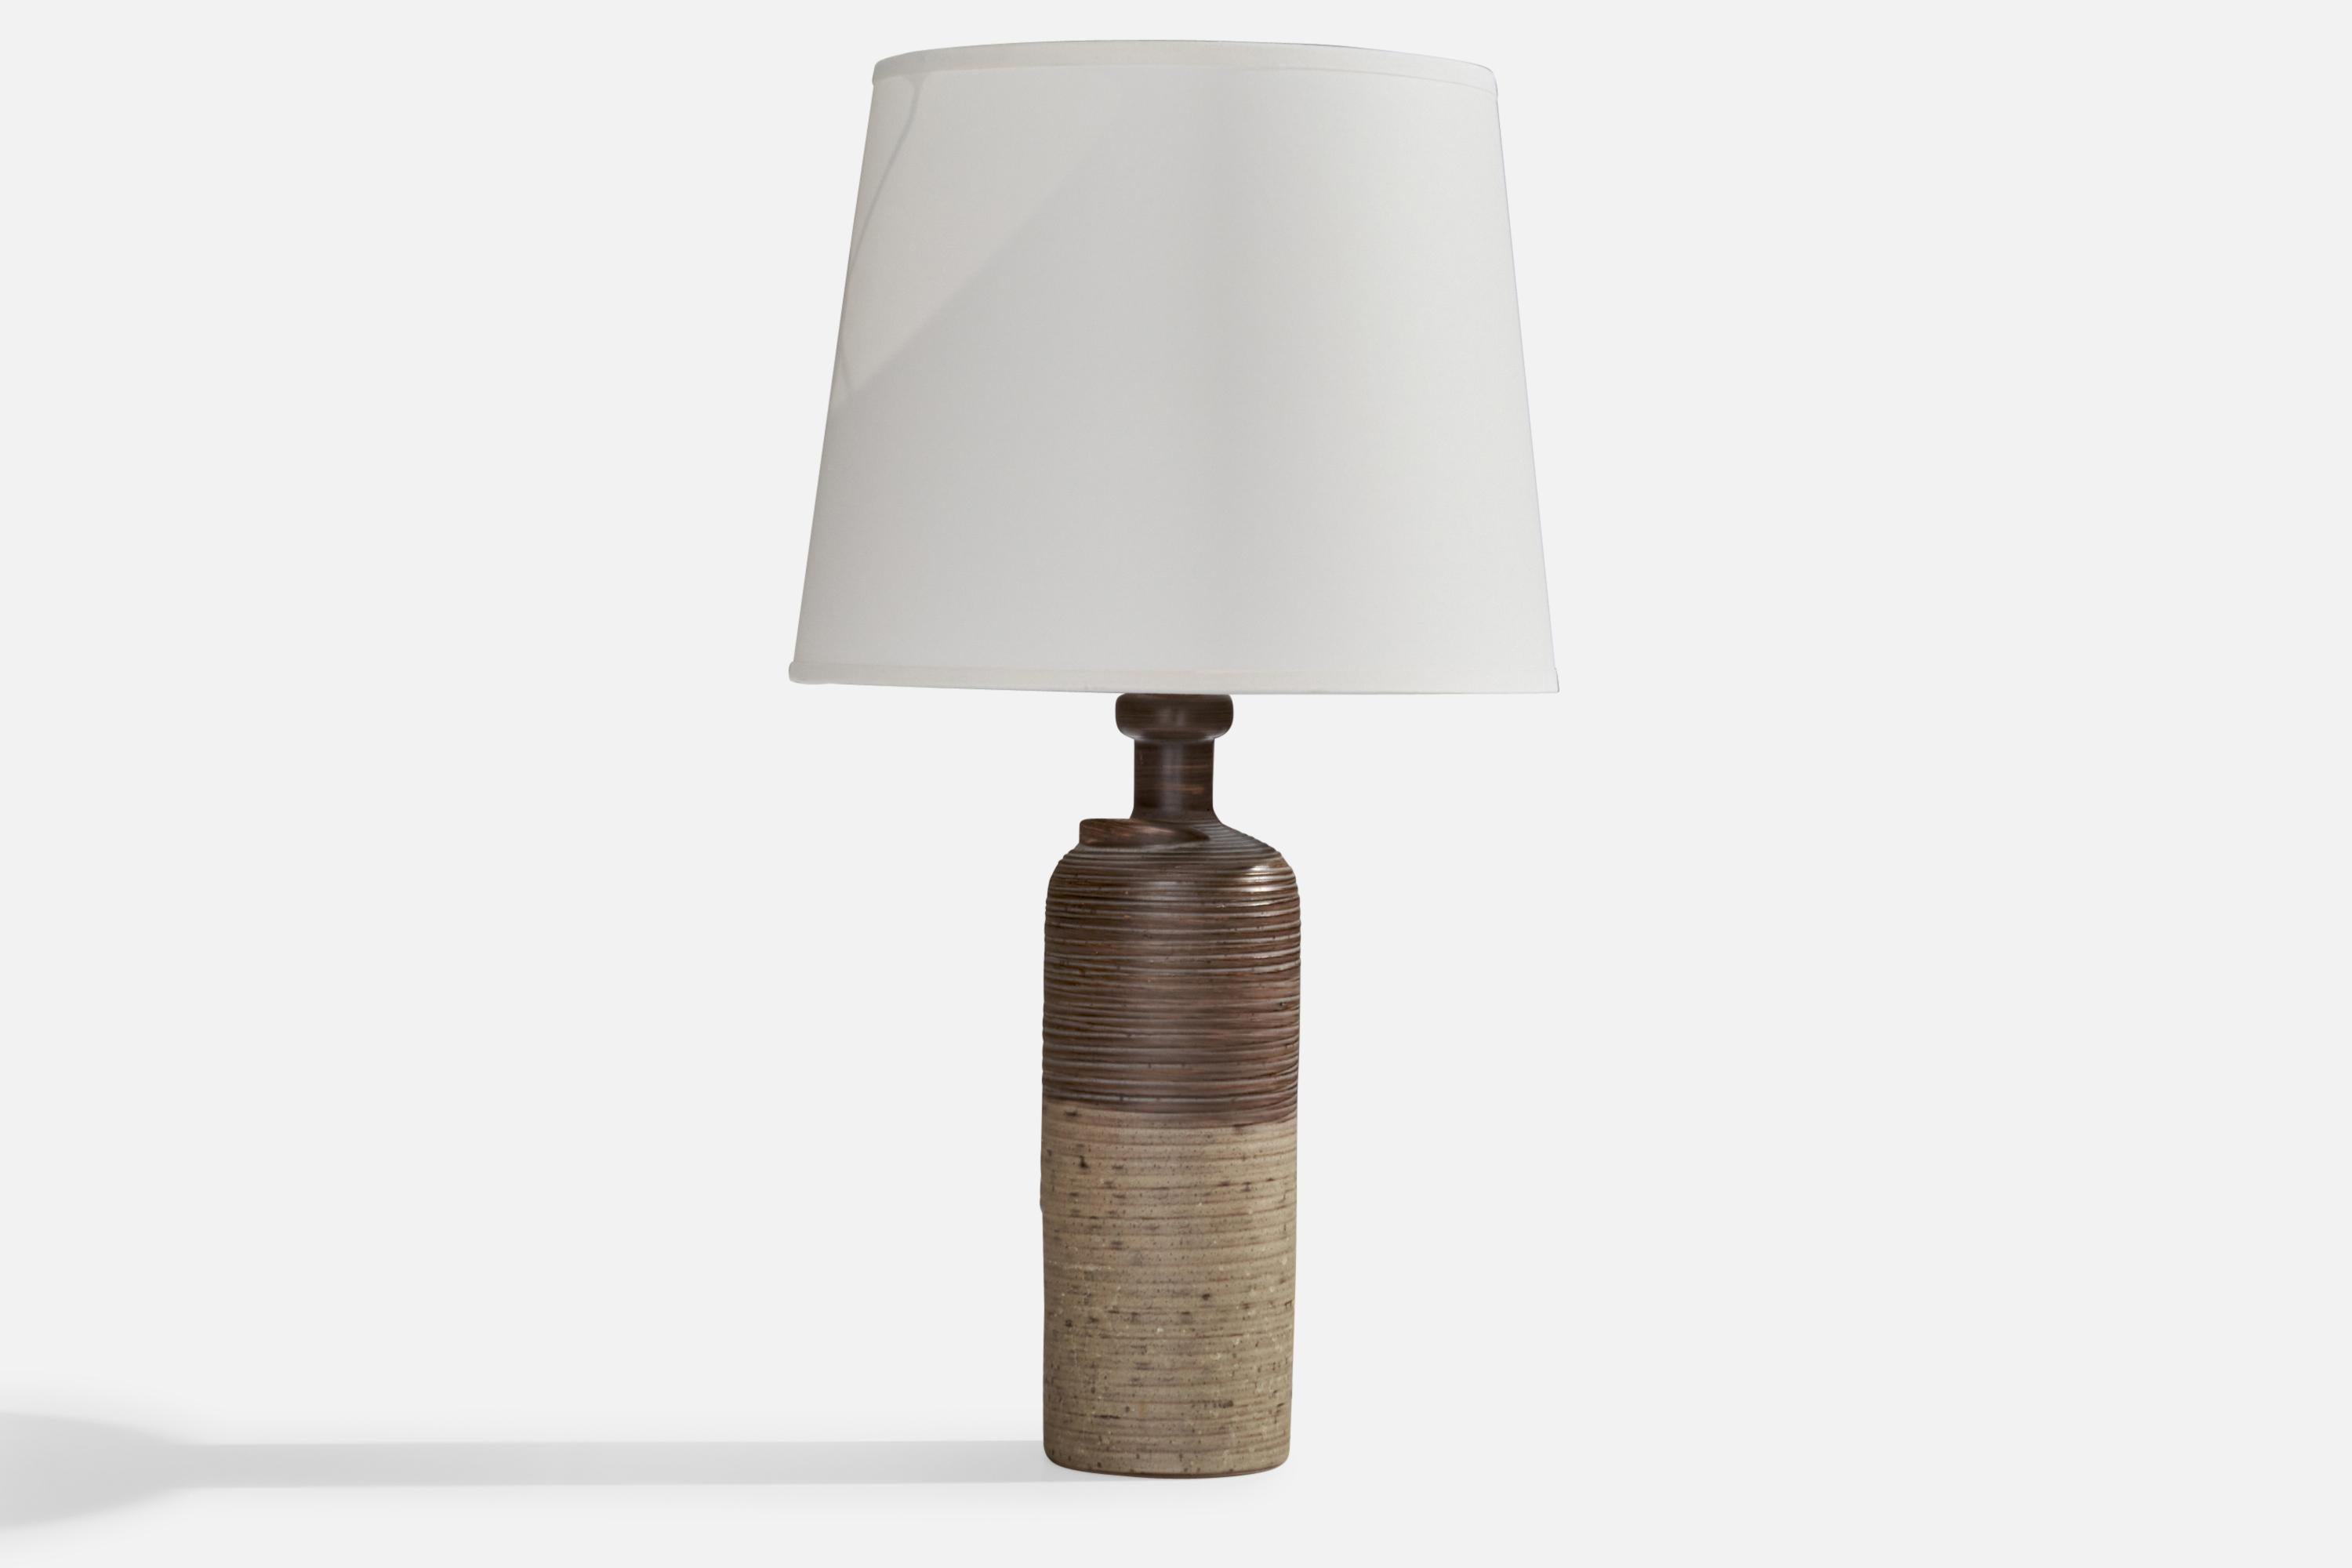 A grey-glazed incised ceramic table lamp designed by Thomas Hellström and produced by Nittsjö, Sweden, c. 1960s.

Dimensions of Lamp (inches): 12.65” H x 3.25”  Diameter
Dimensions of Shade (inches): 7” Top Diameter x 10” Bottom Diameter x 8”